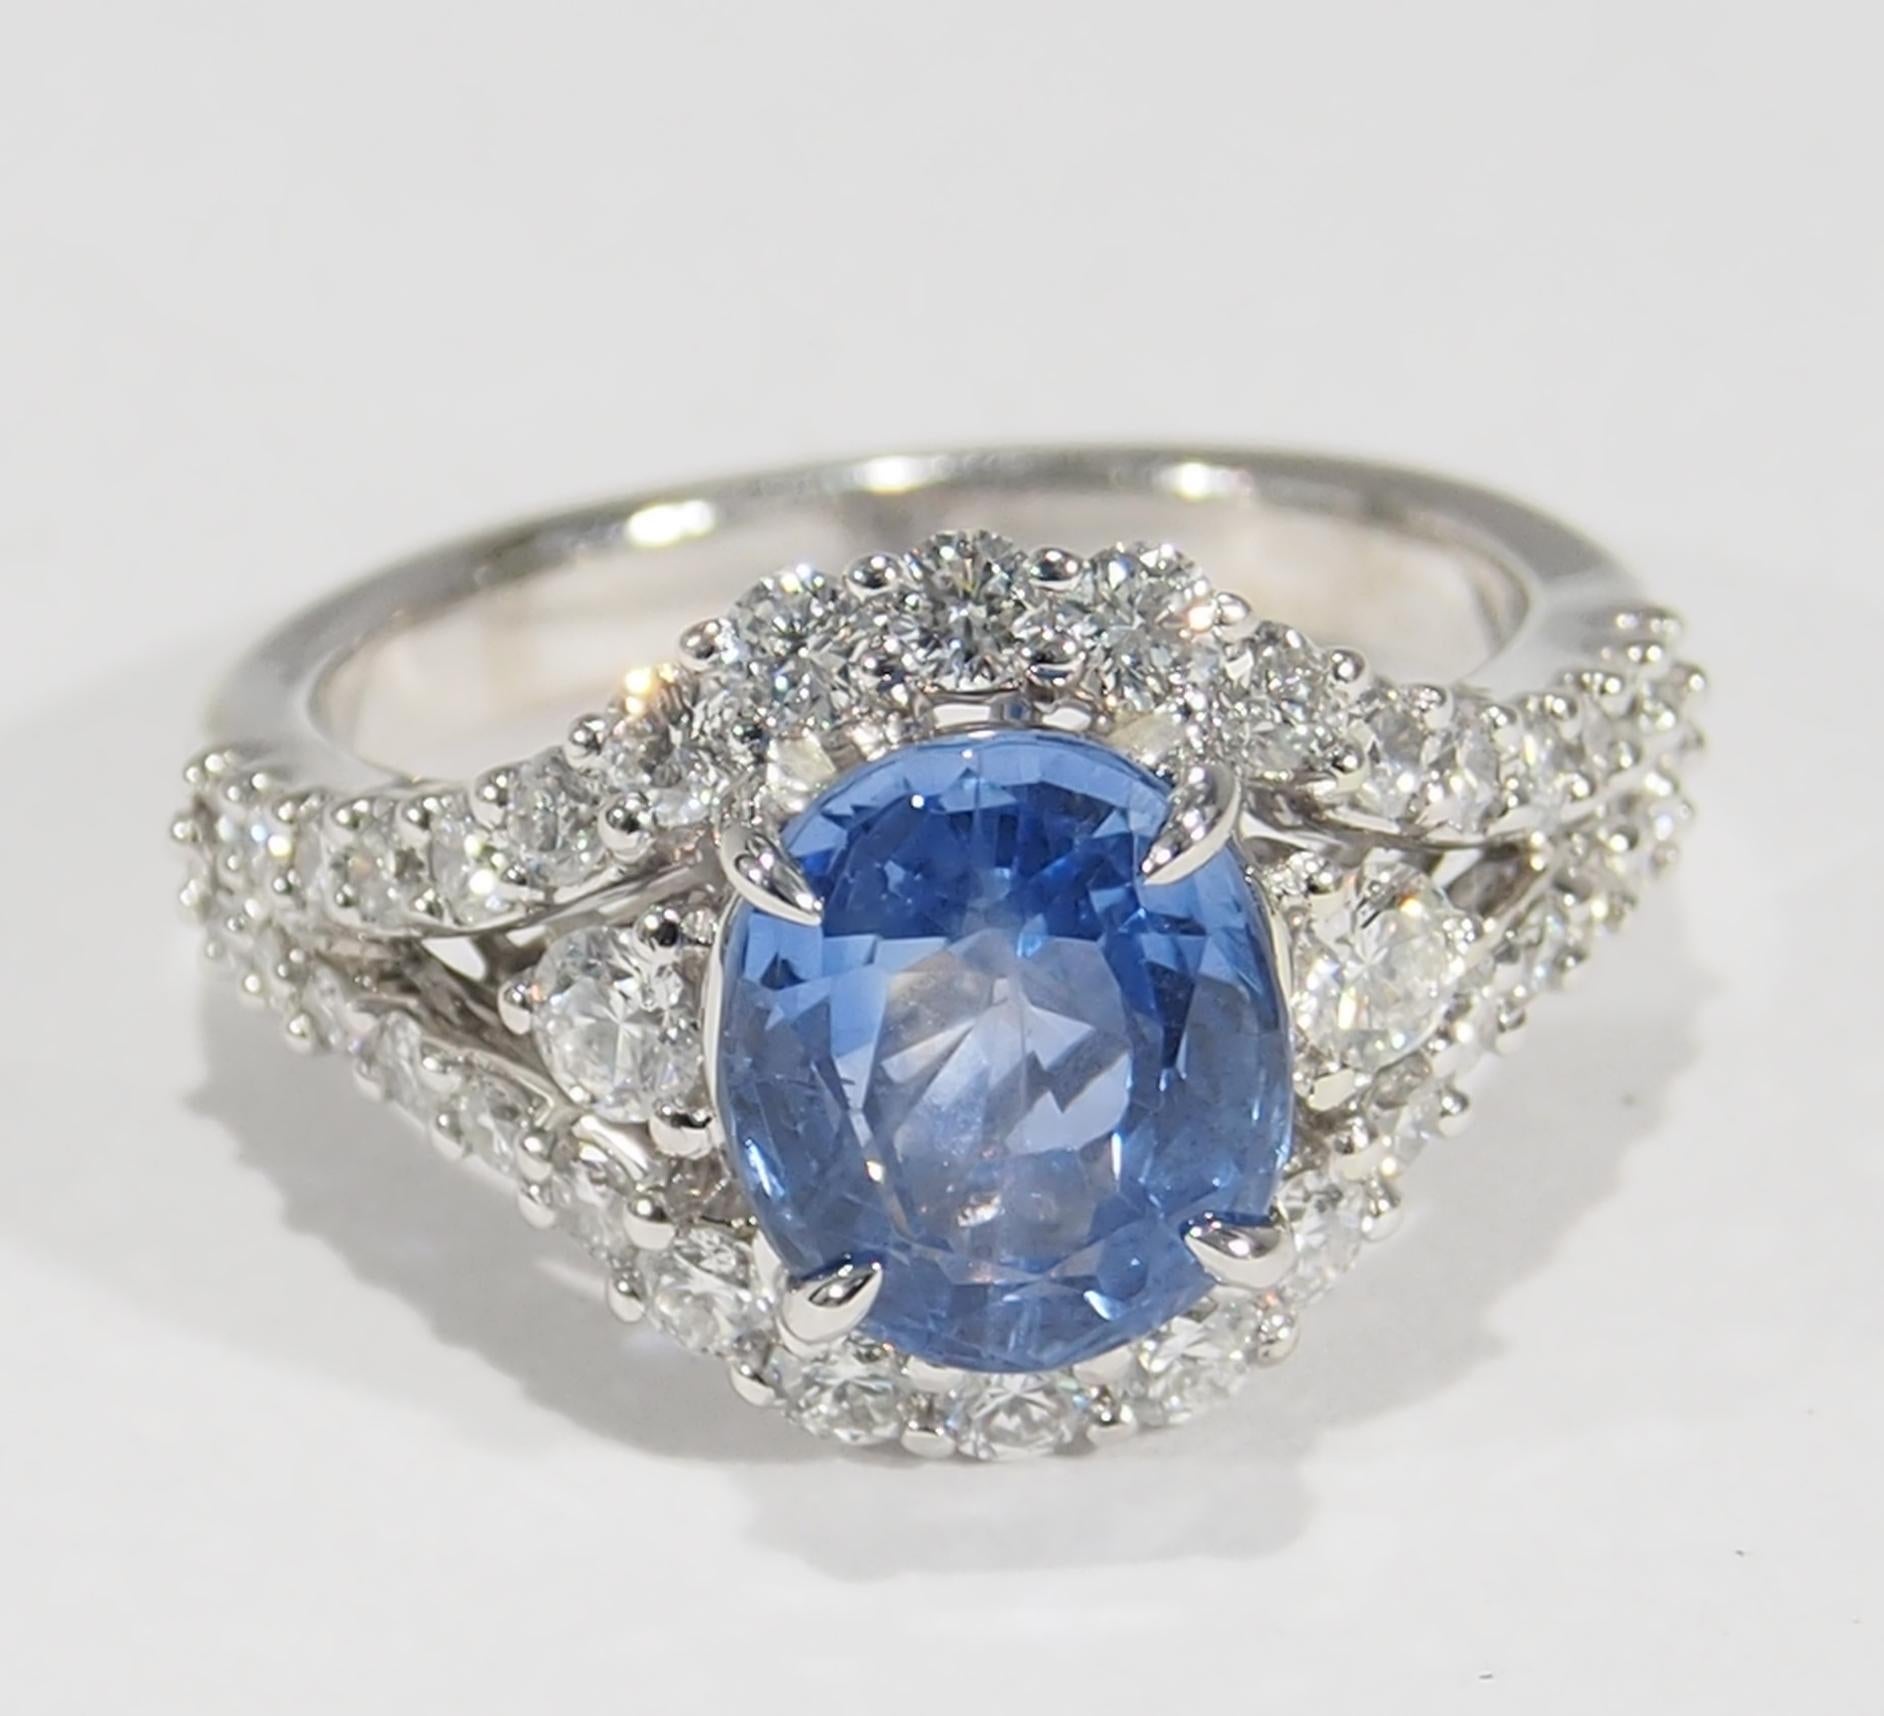 This is a stunning 18K White Gold Sapphire and Diamond Ring. There is a lustrous Ceylon Sapphire, 2.96ct, that is surrounded by (36) Round Brilliant Cut Diamonds, approximately 1.18ctw, G-H in Color, VS in Clarity creating this tantalizing Ring. The